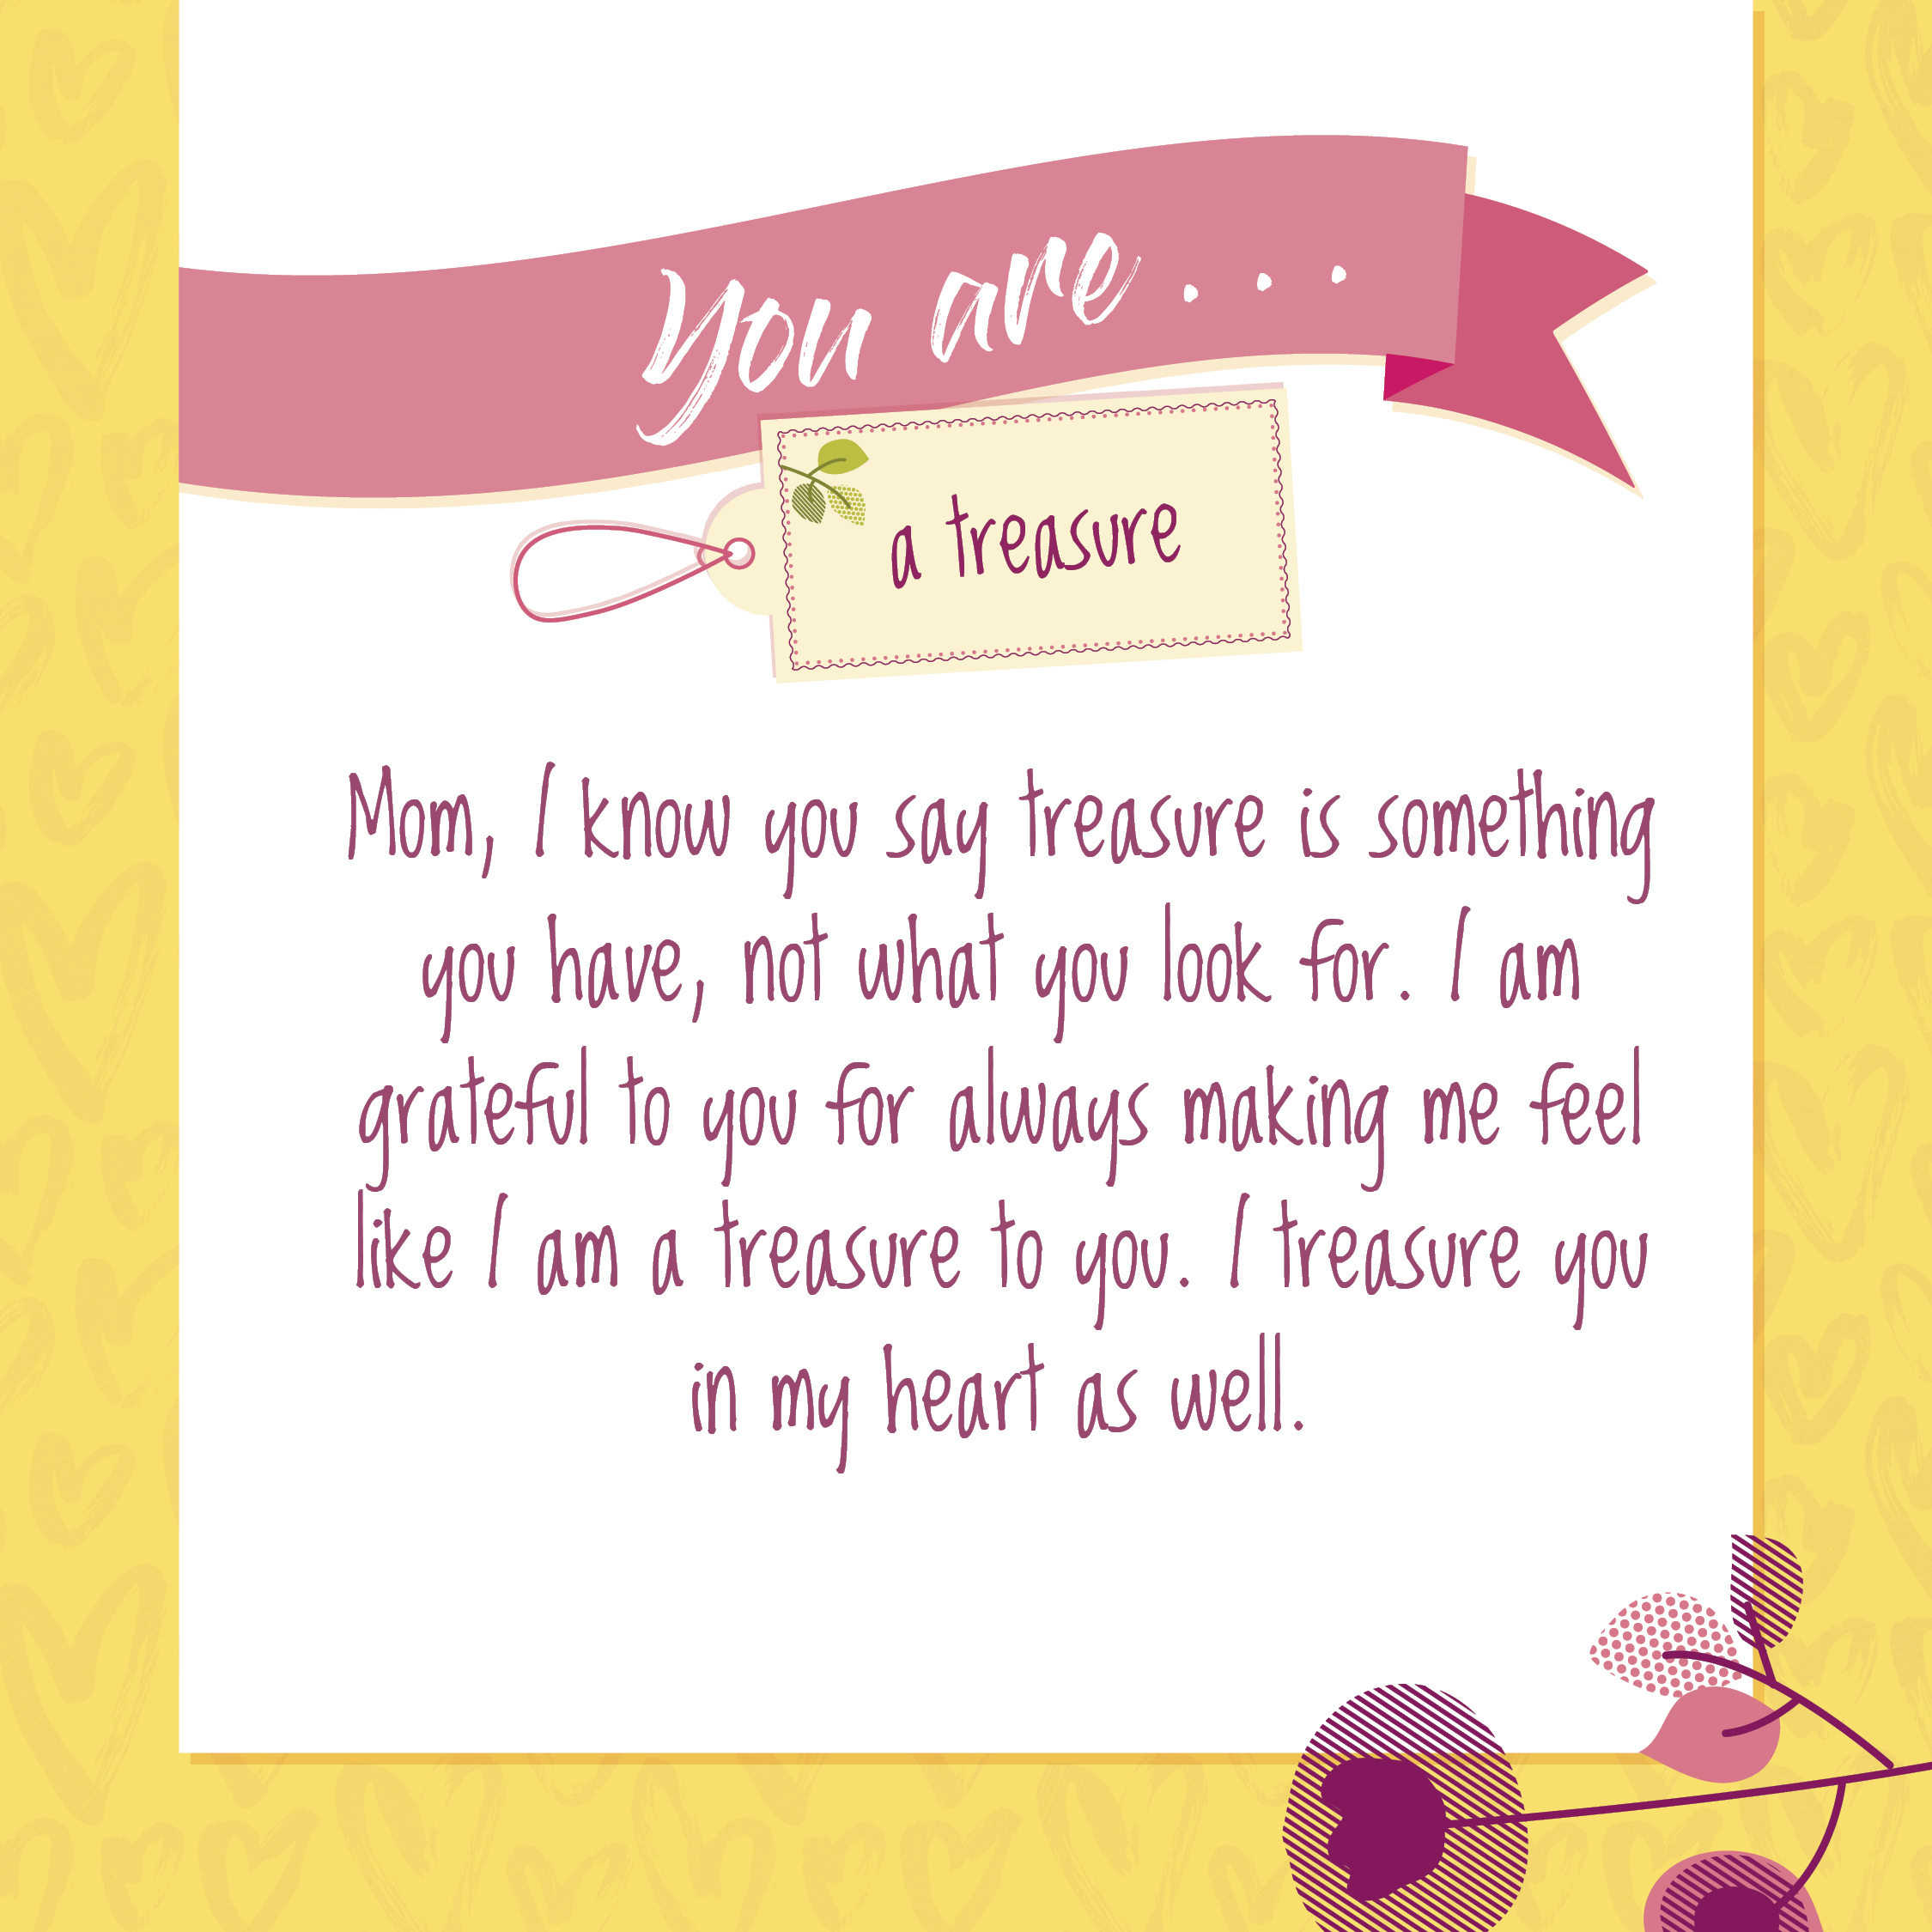 "Mom, I know you say treasure is something you have, not what you look for. I am grateful to you for always making me feel like I am a treasure to you. I treasure you in my heart as well." ~ I Love You, Mom! book by Blythe Daniel and Dr. Helen McIntosh